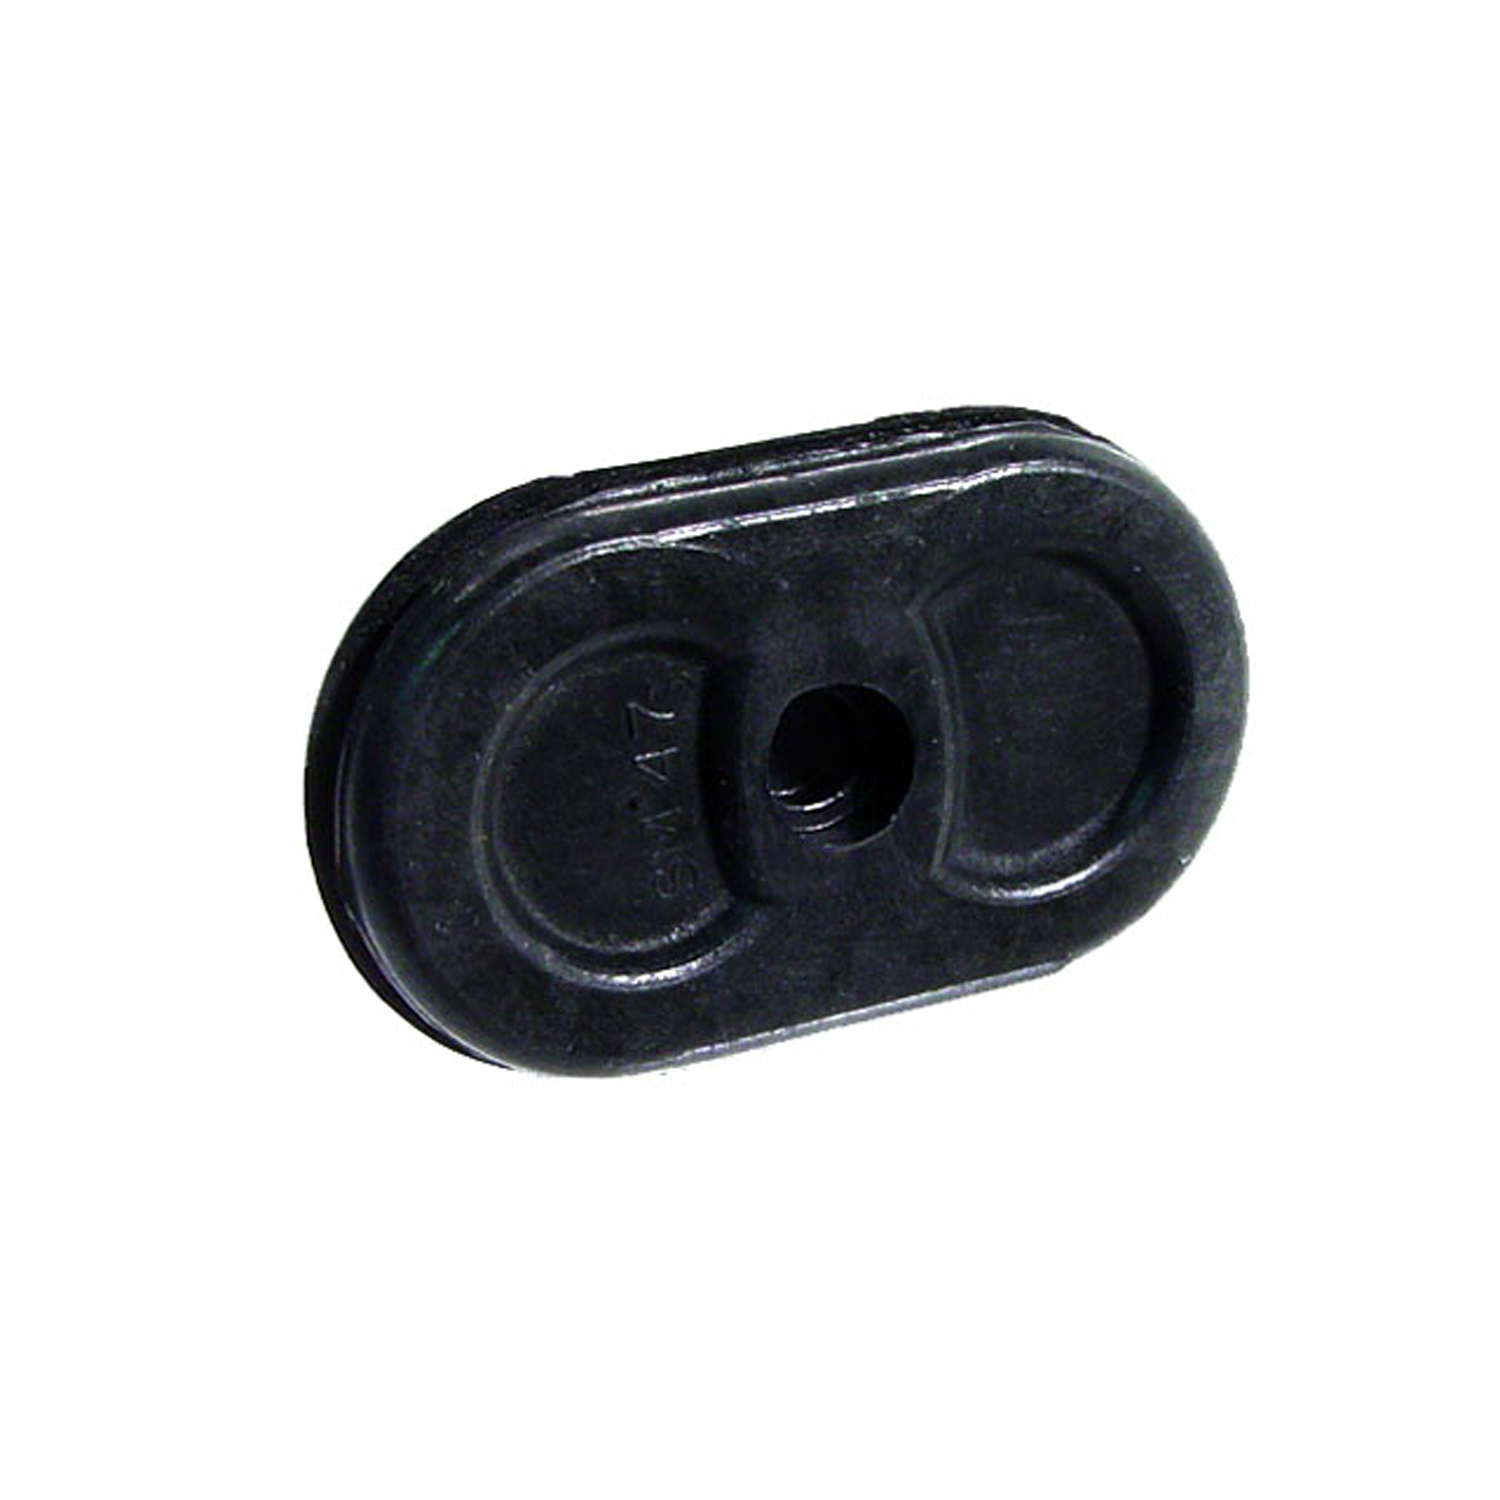 1947 Oldsmobile Special Speedometer Cable Firewall Grommet.  Fits 1-7/8 long hole-SM 47